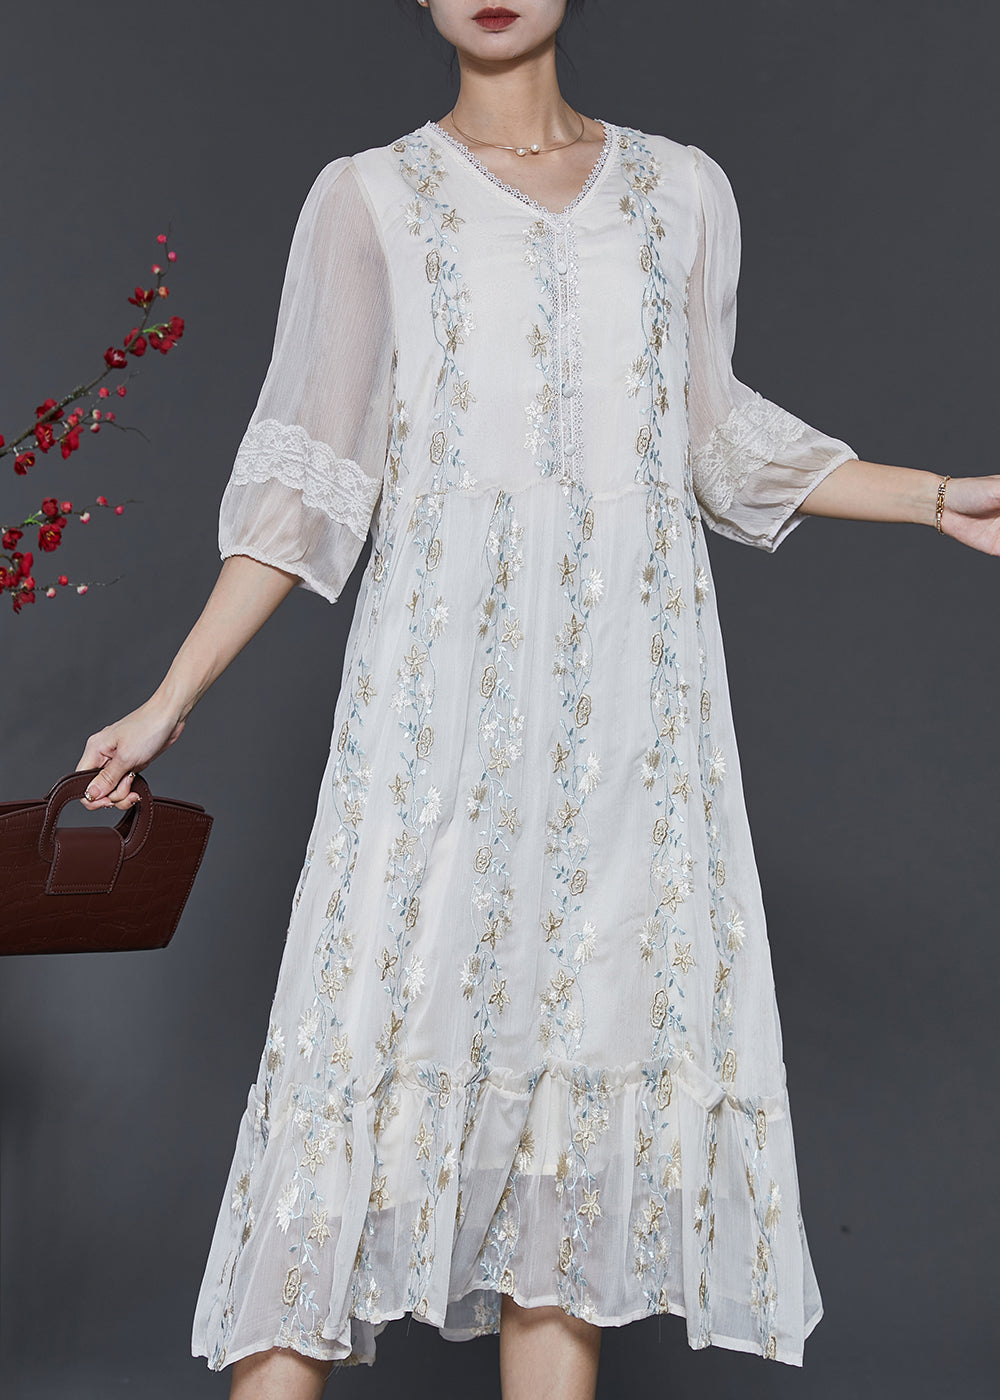 Boutique White Embroidered Patchwork Lace Silk Dresses Summer